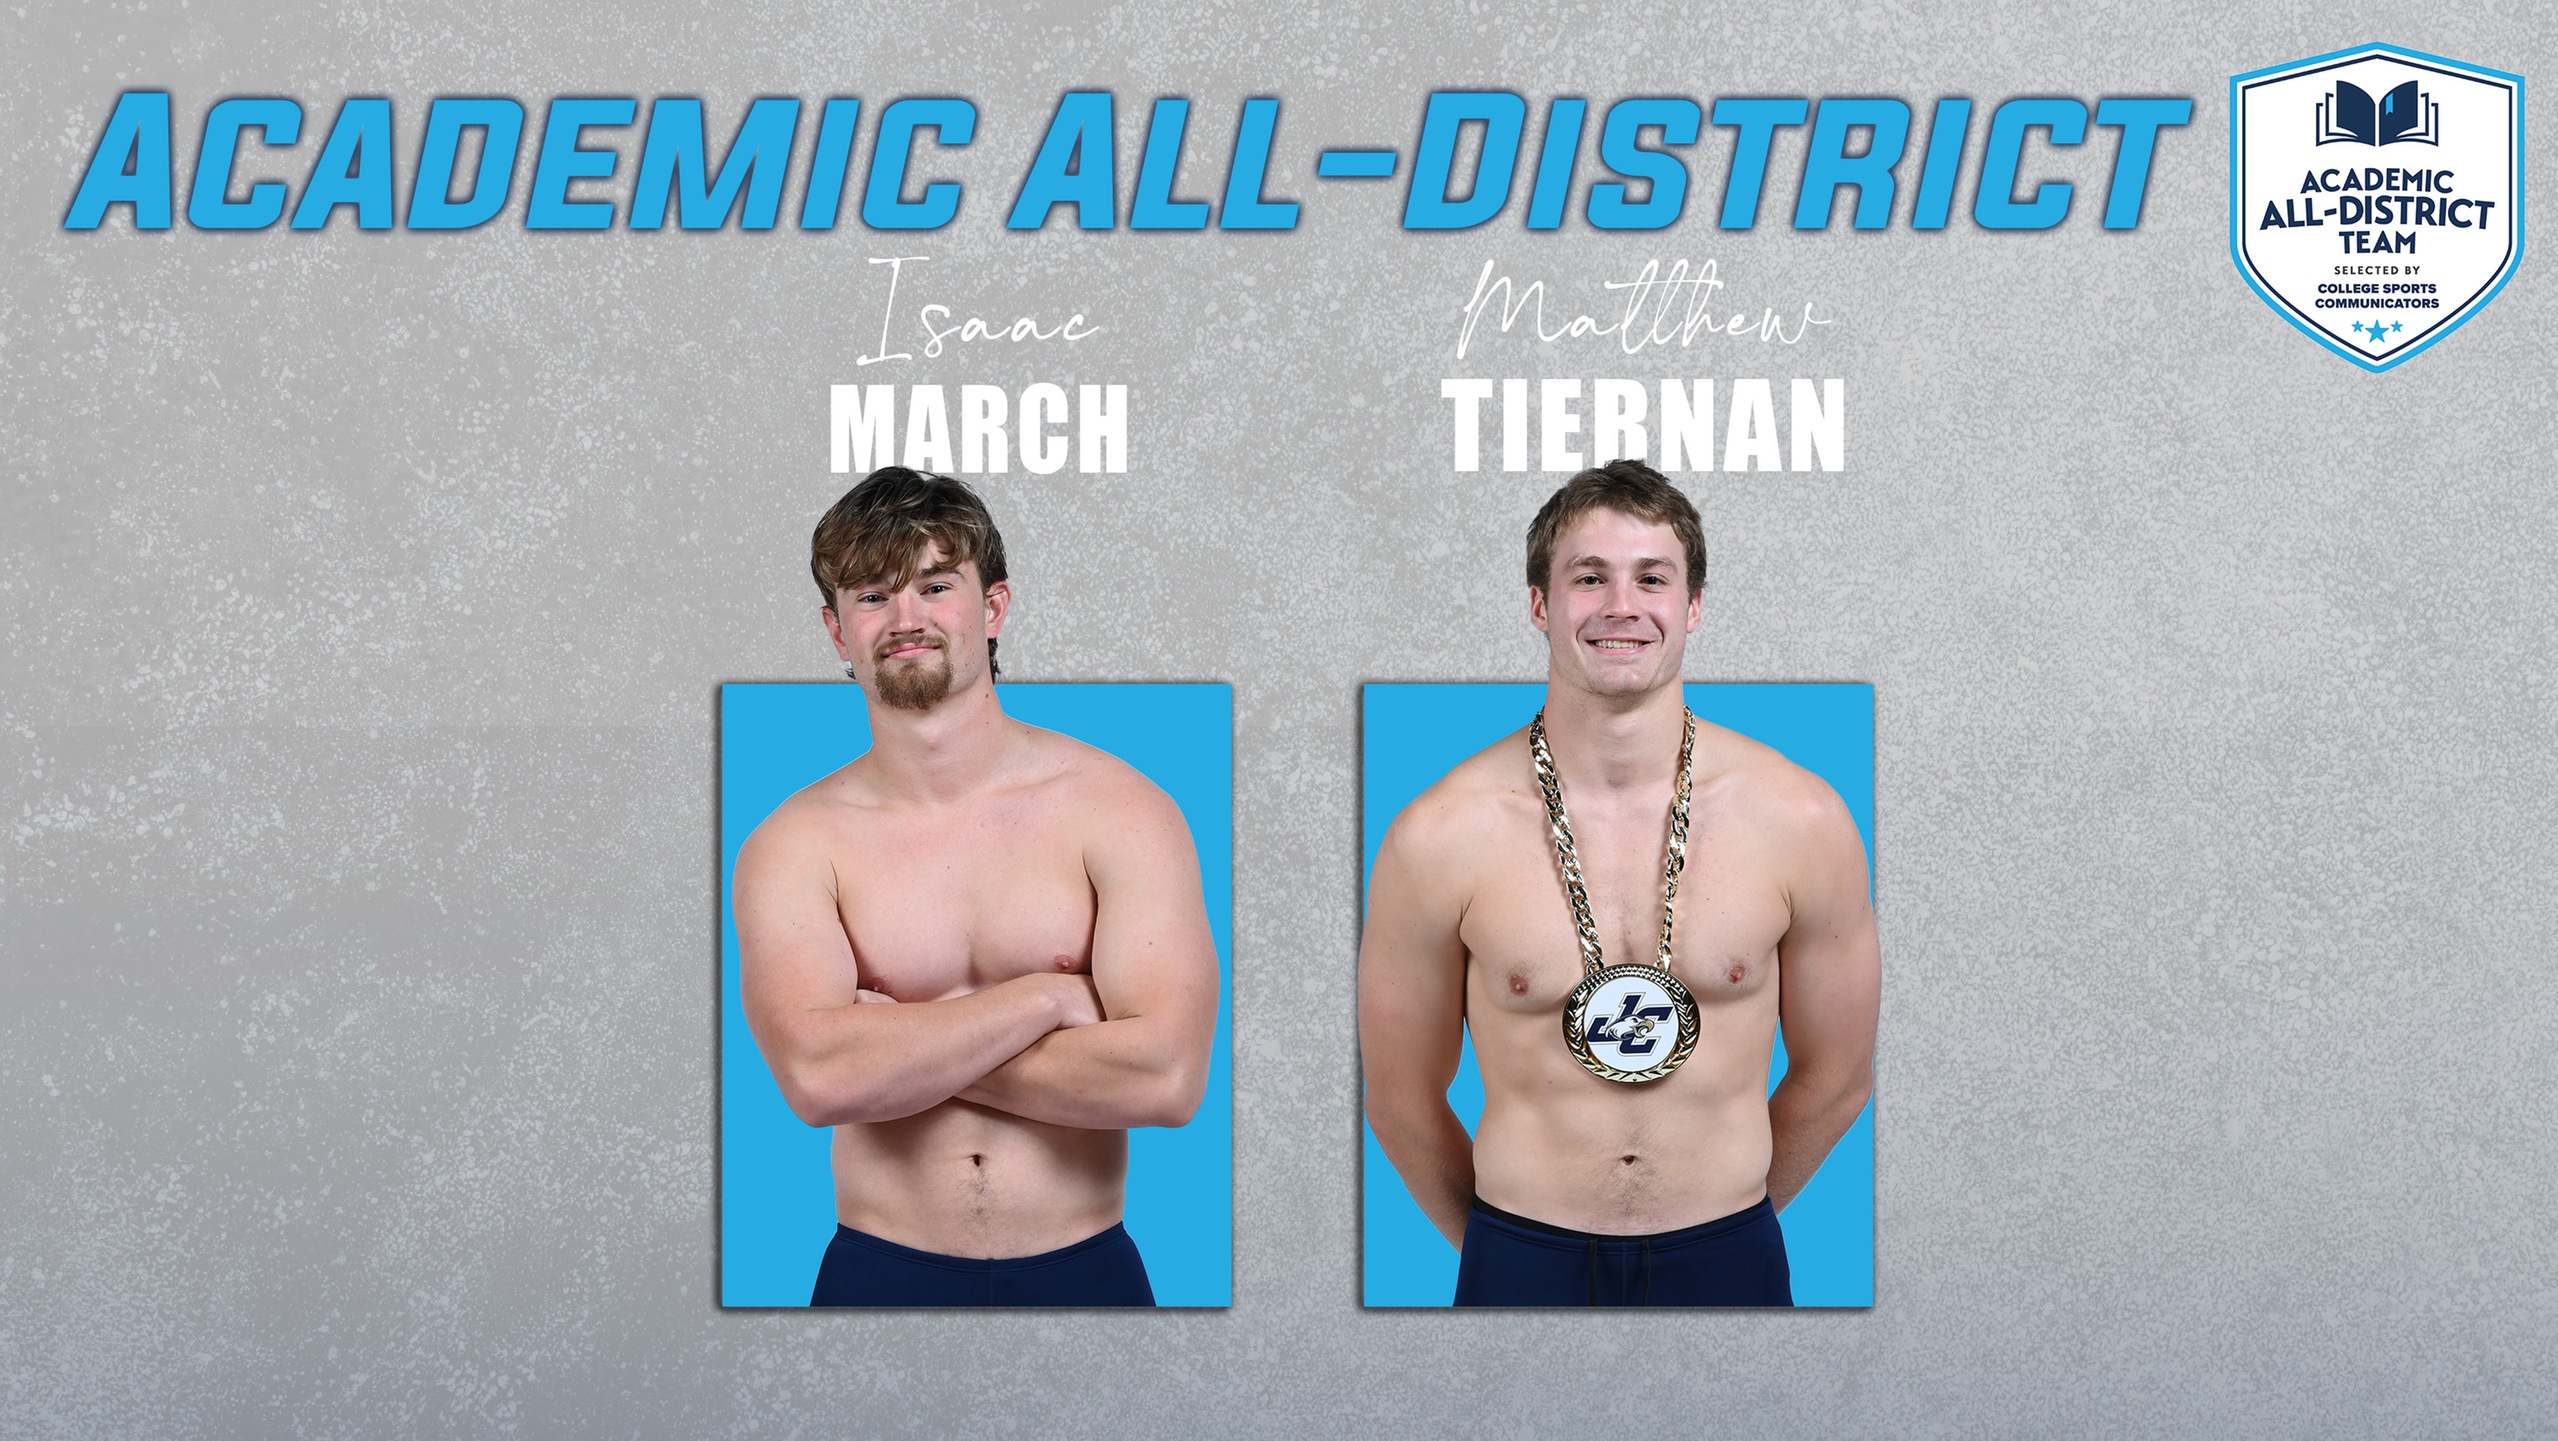 March, Tiernan Named to CSC Academic All-District&reg; Men's Swimming and Diving Team